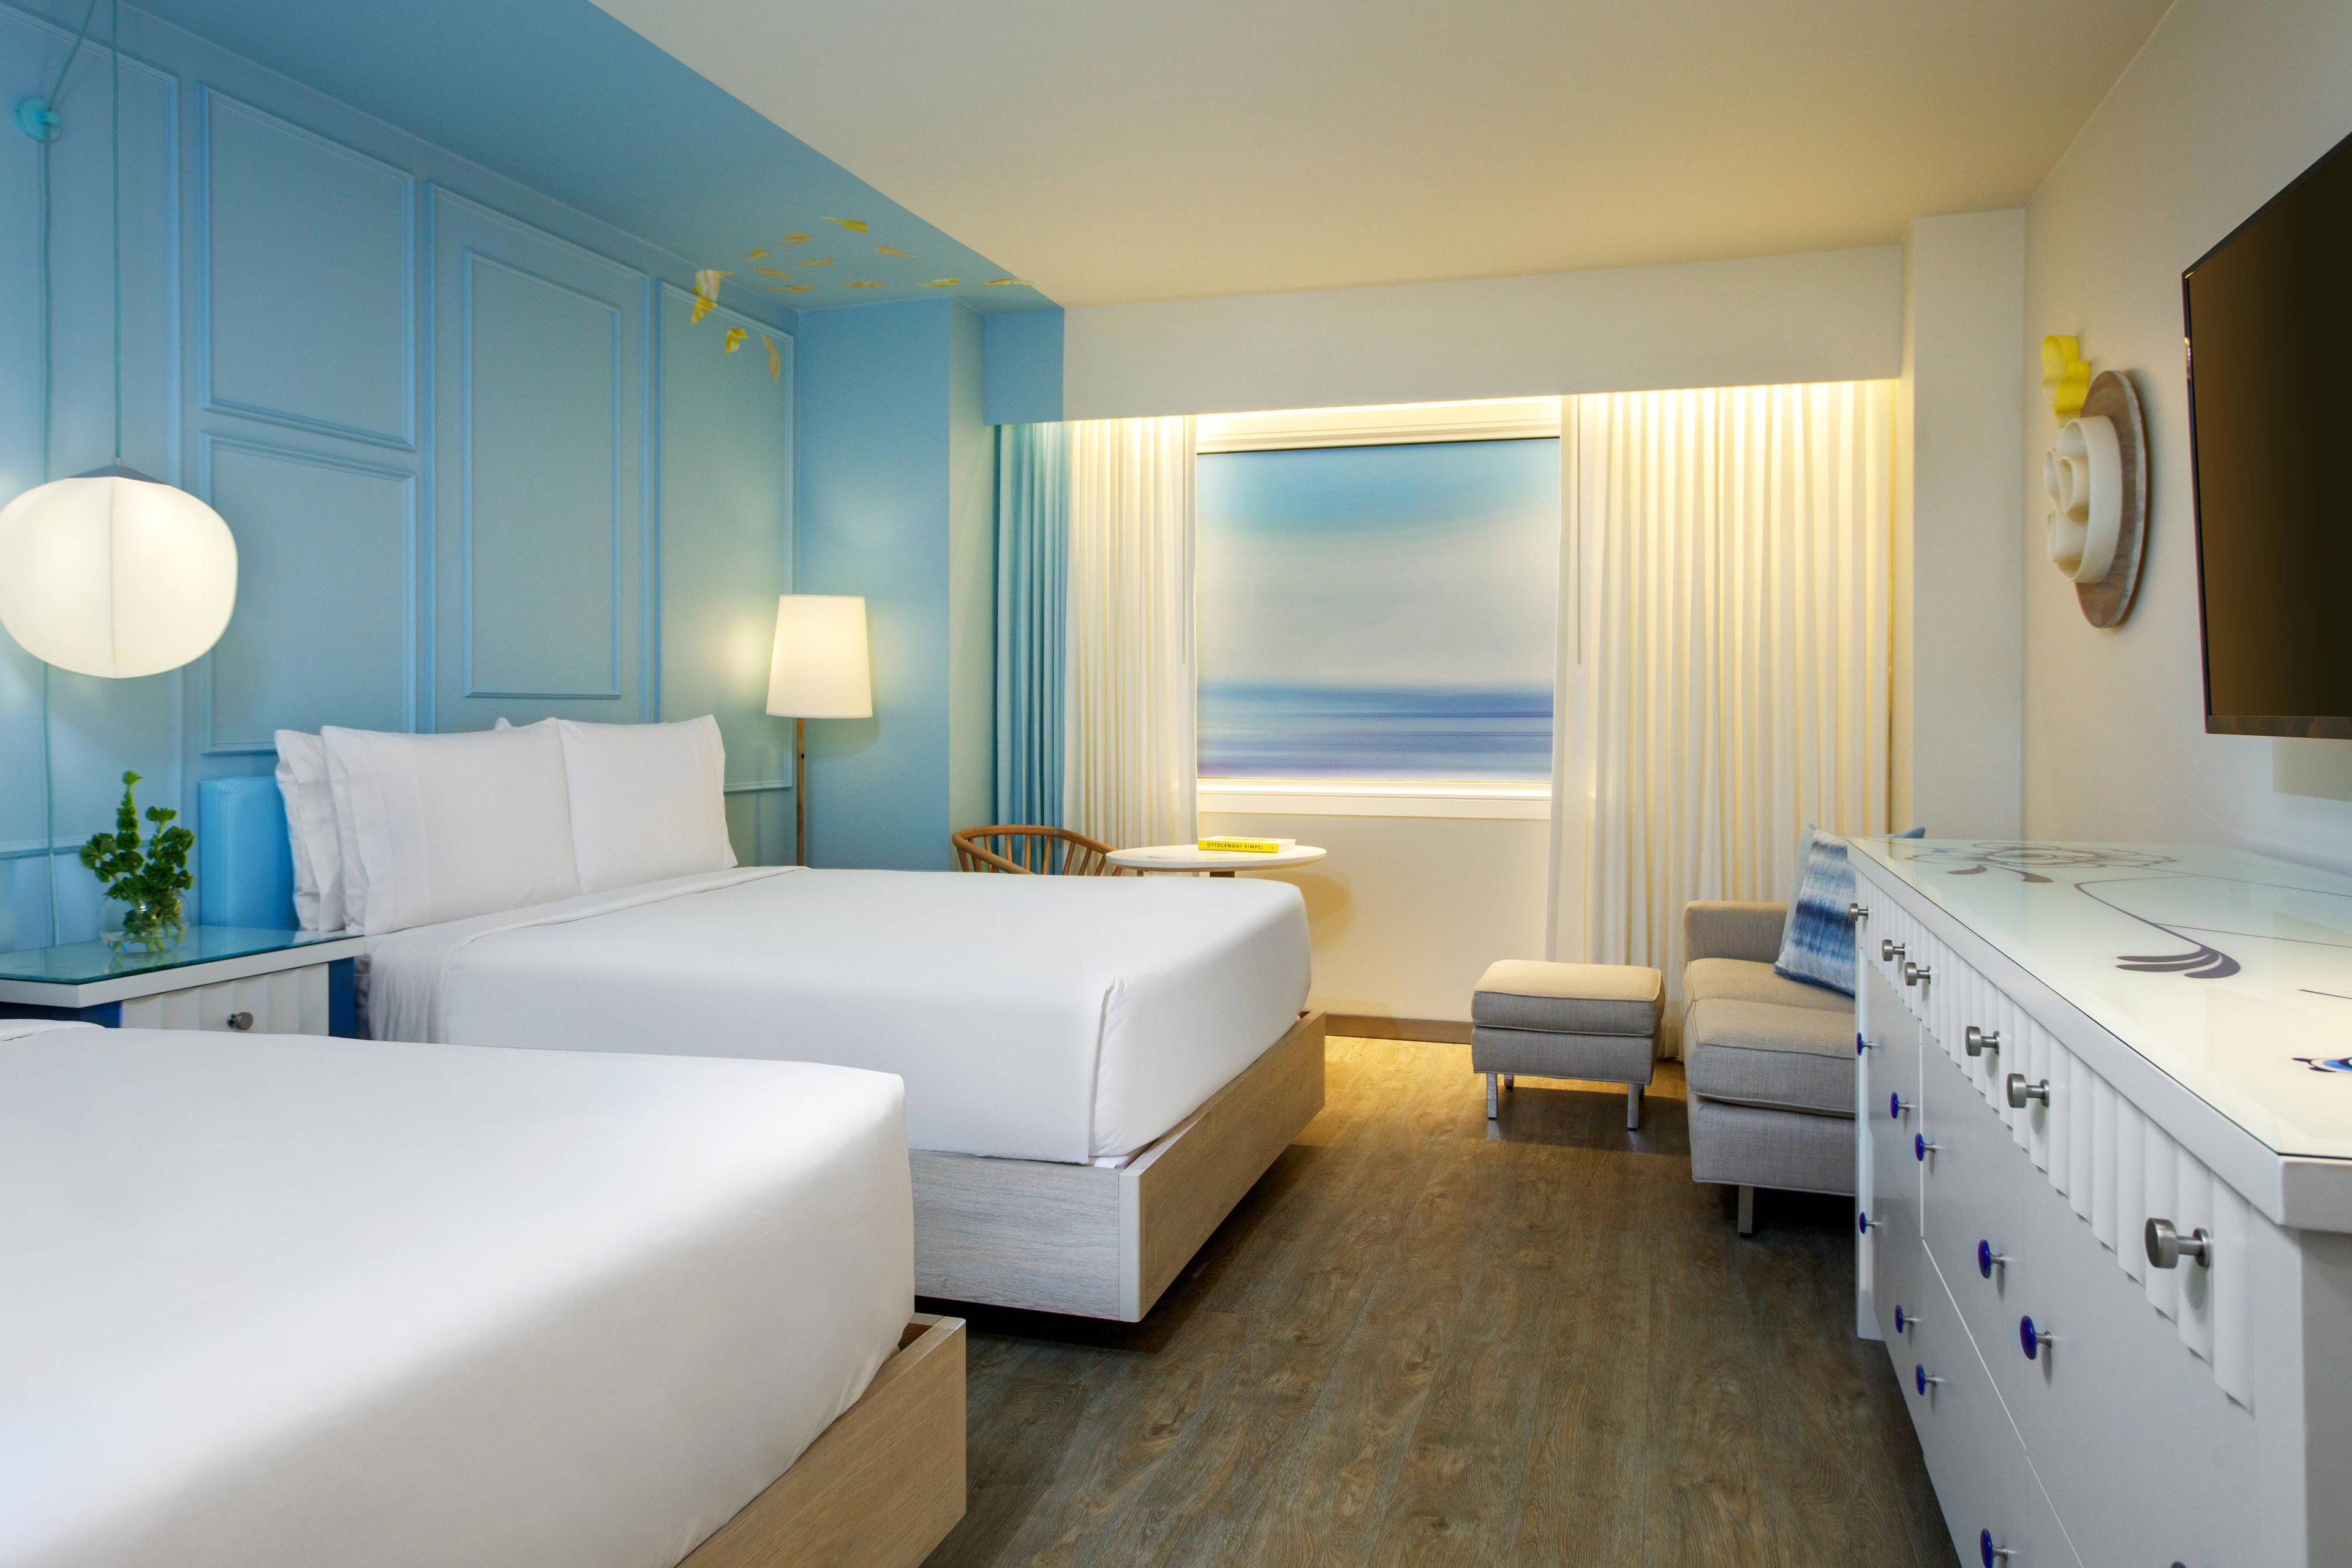 Our spacious rooms offer comfortable beds, modern design and thoughtful room service for your relaxing travels.